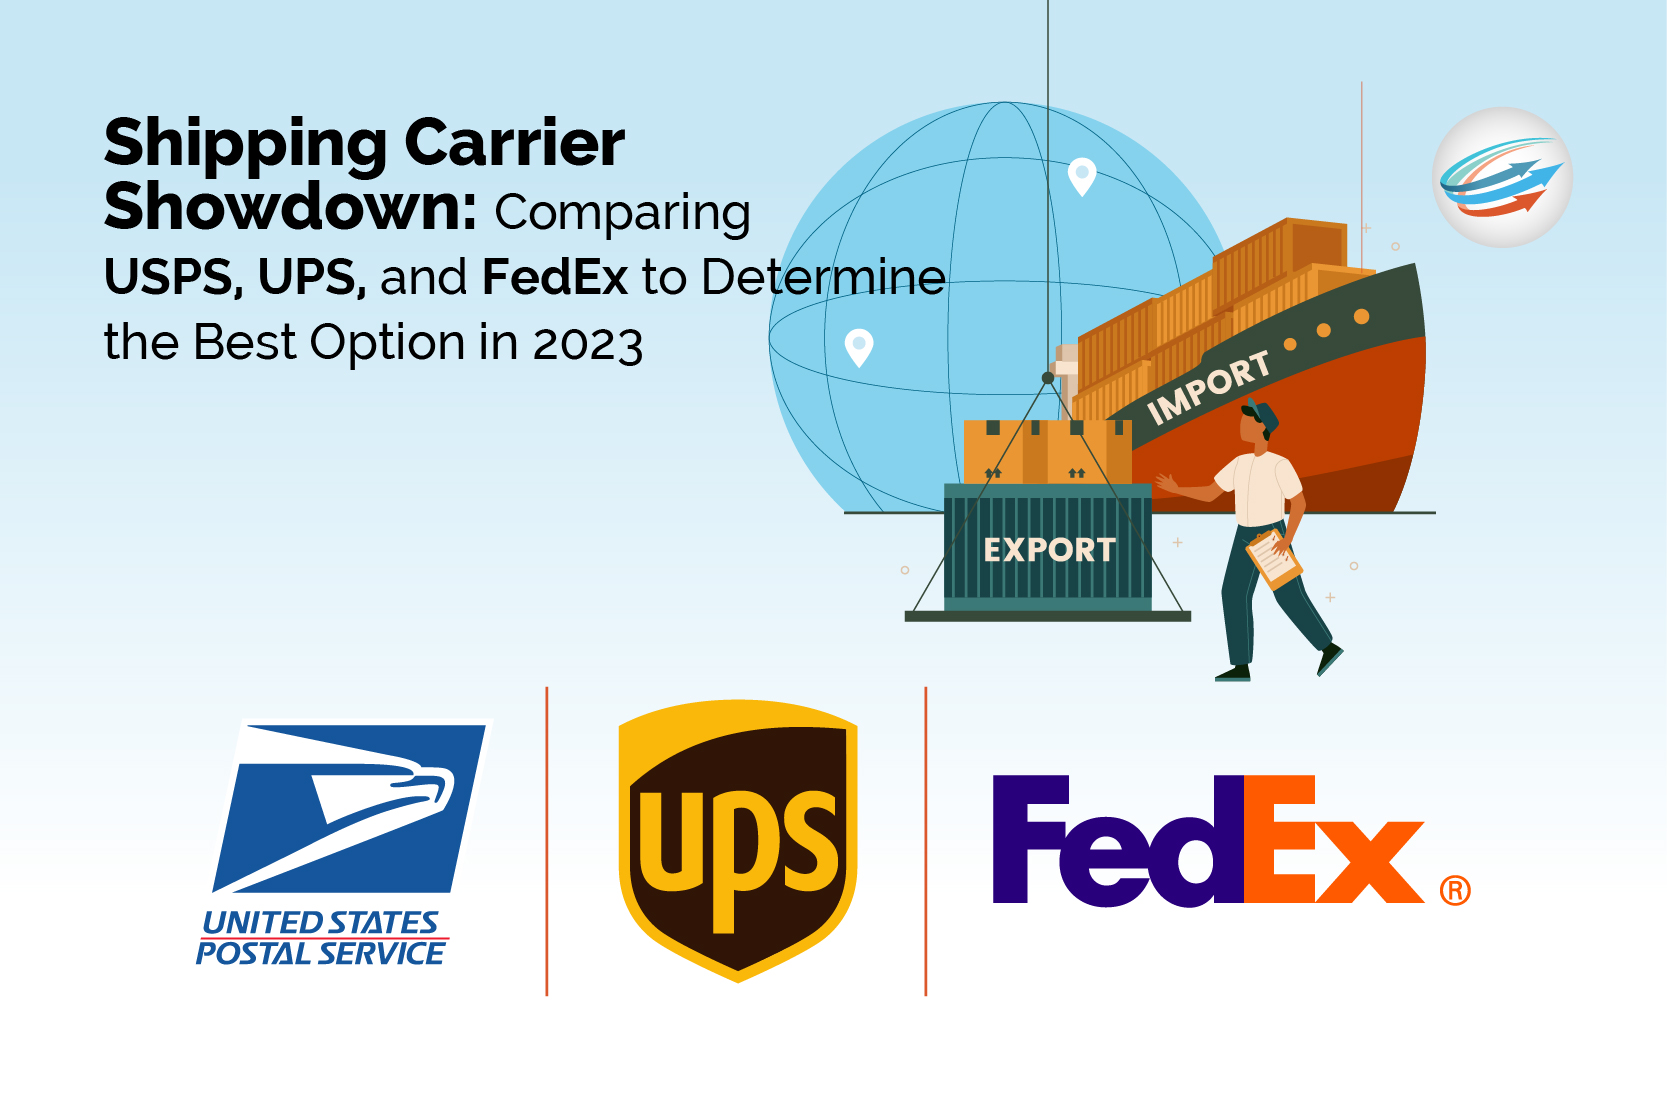 https://www.apsfulfillment.com/wp-content/uploads/2023/06/USPS-UPS-and-FedEx-to-Determine-the-Best-Option-in-2023-01.jpg